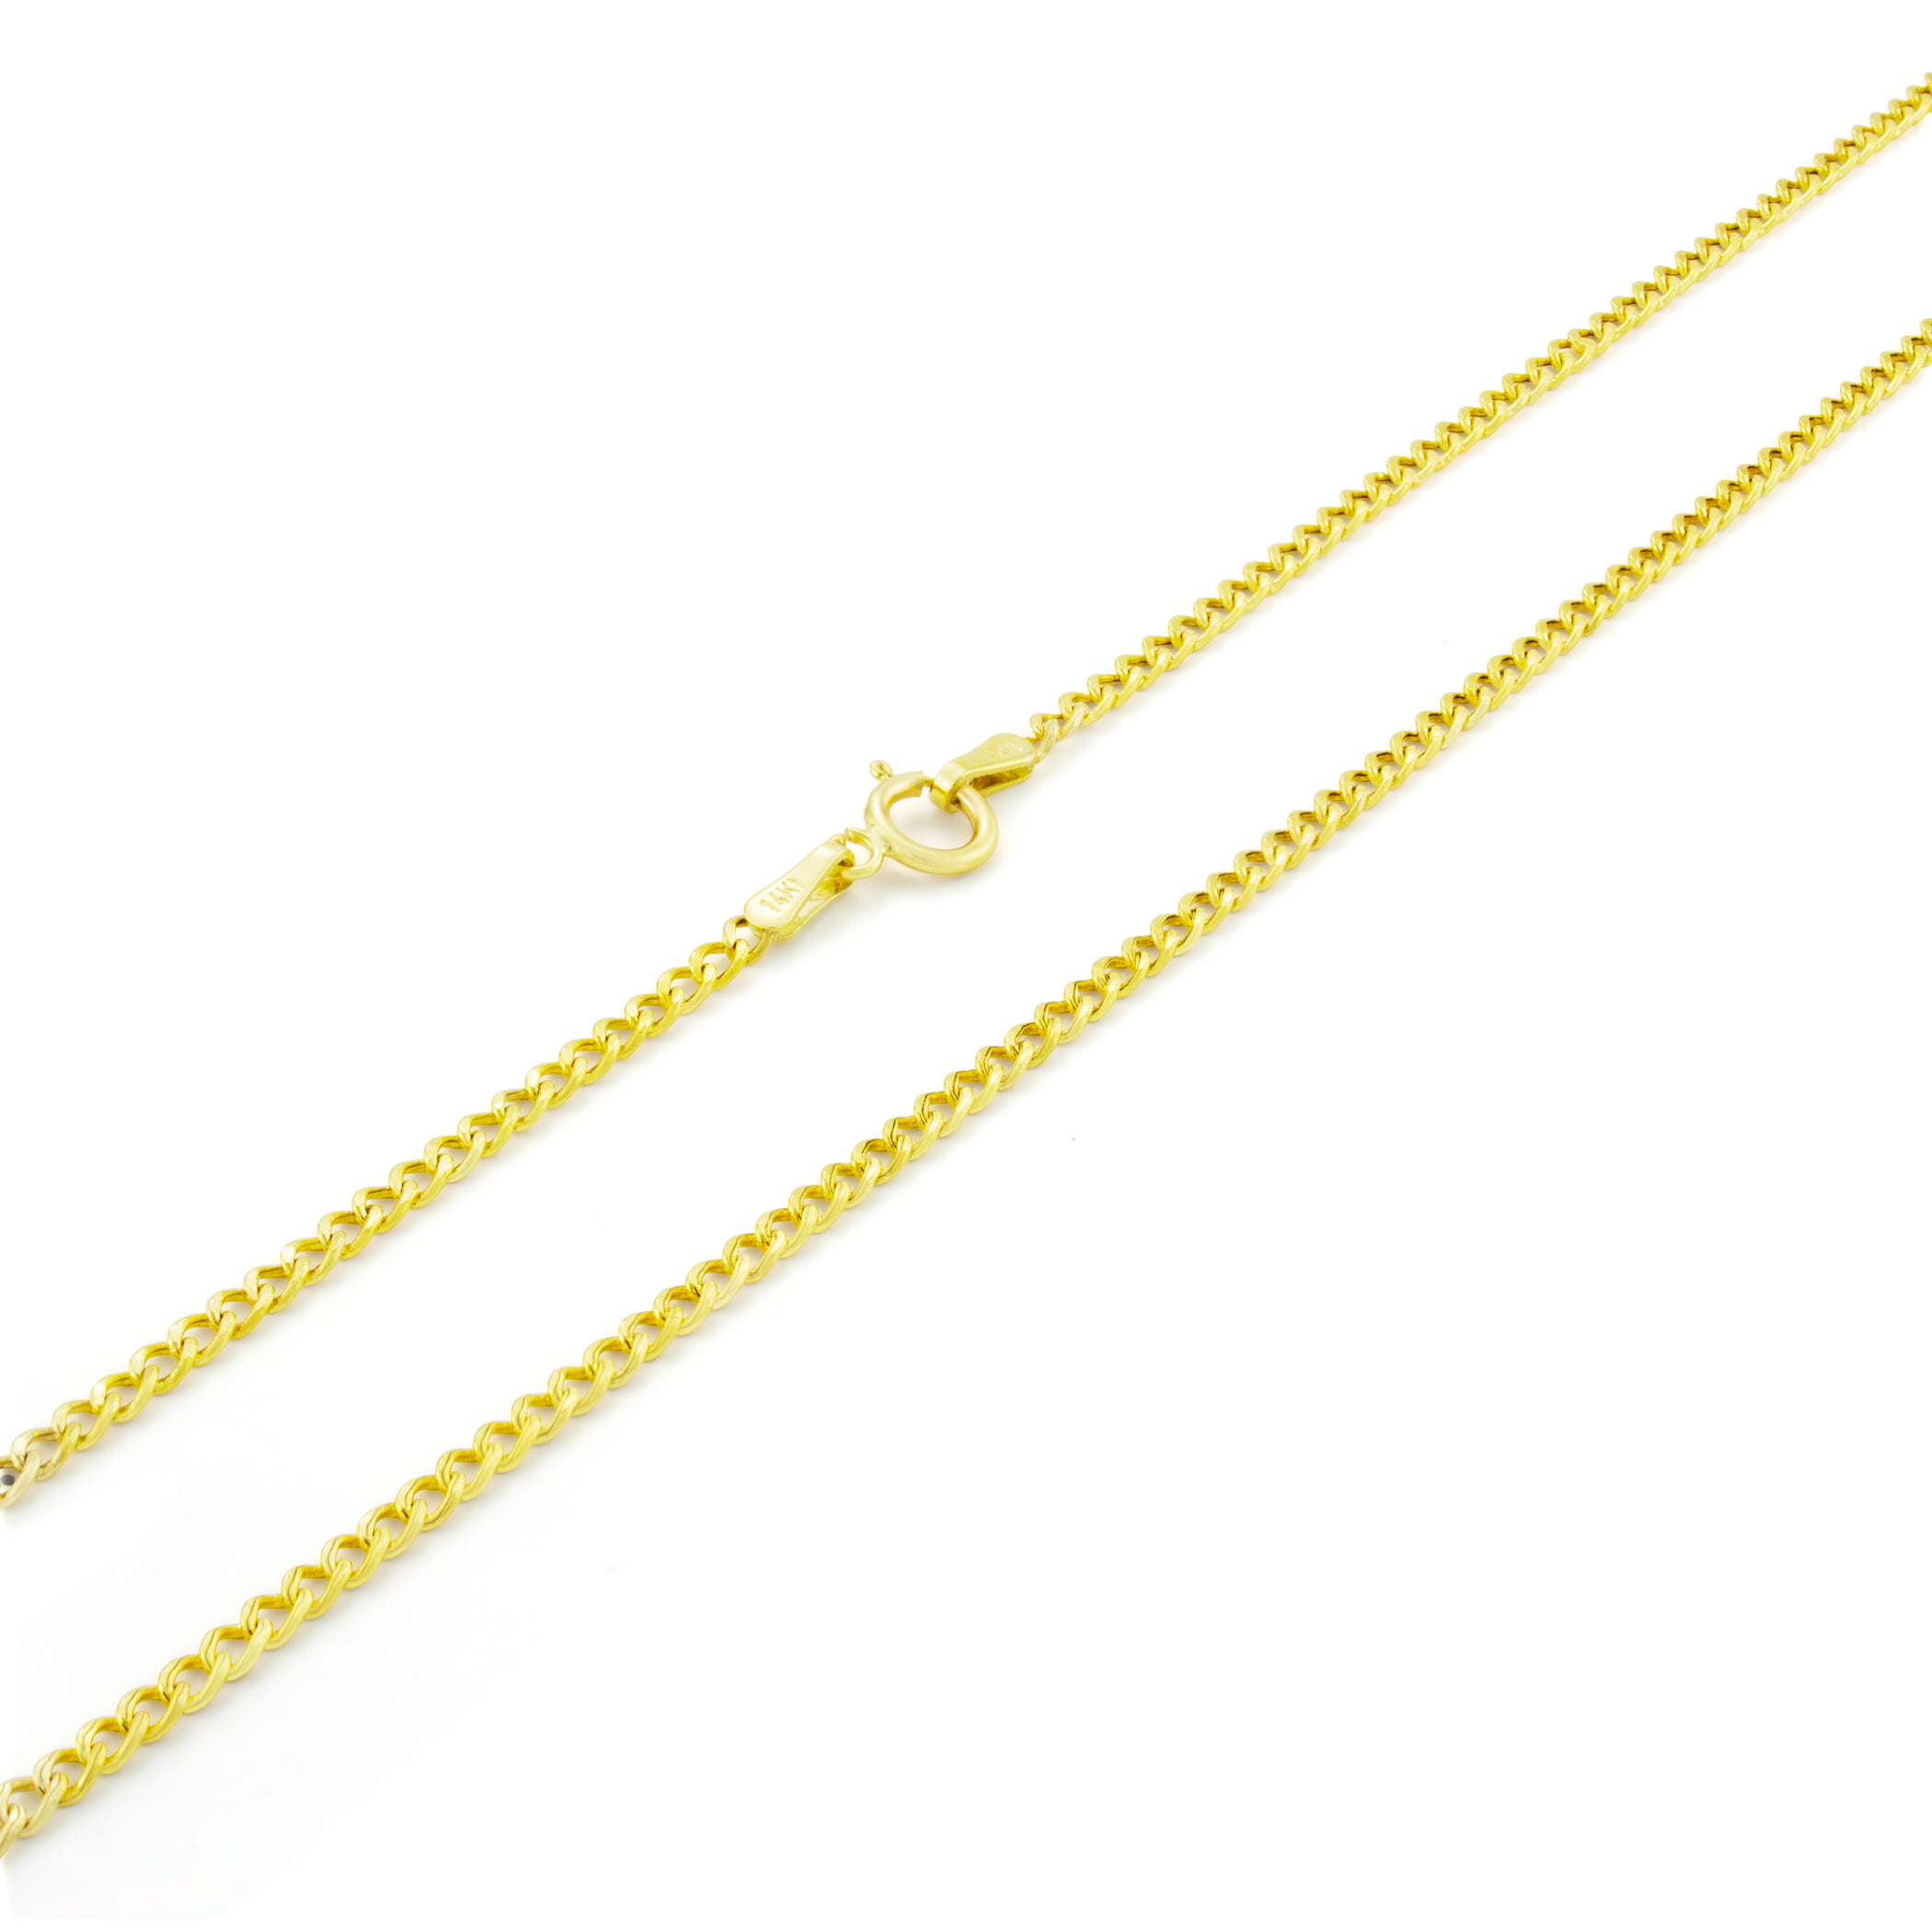 Ioka 14K Yellow Solid Gold 2mm Cuban Chain Necklace with Spring Ring Clasp